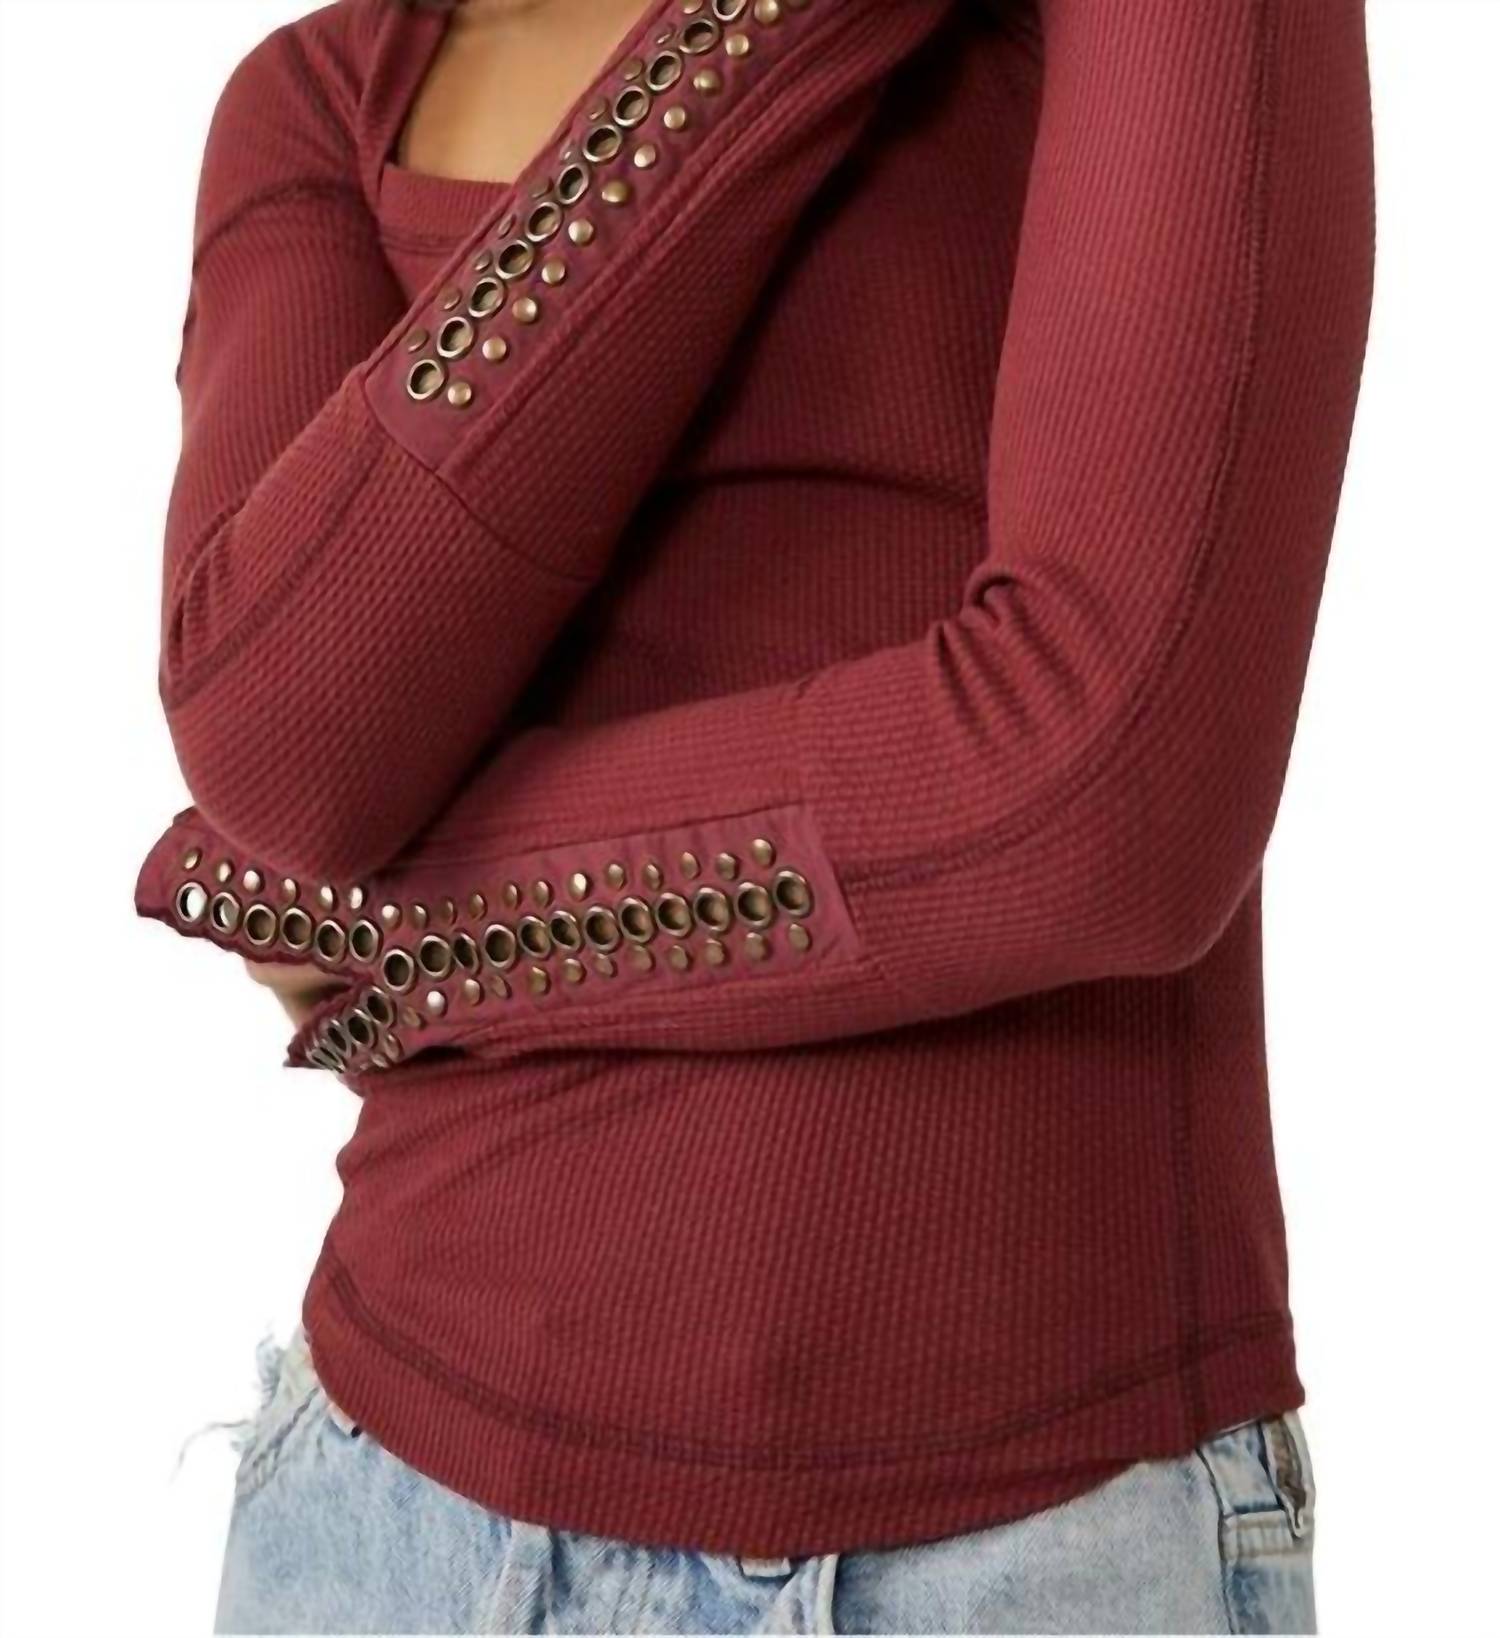 FREE PEOPLE A Little Unruly Top in Red Jasper